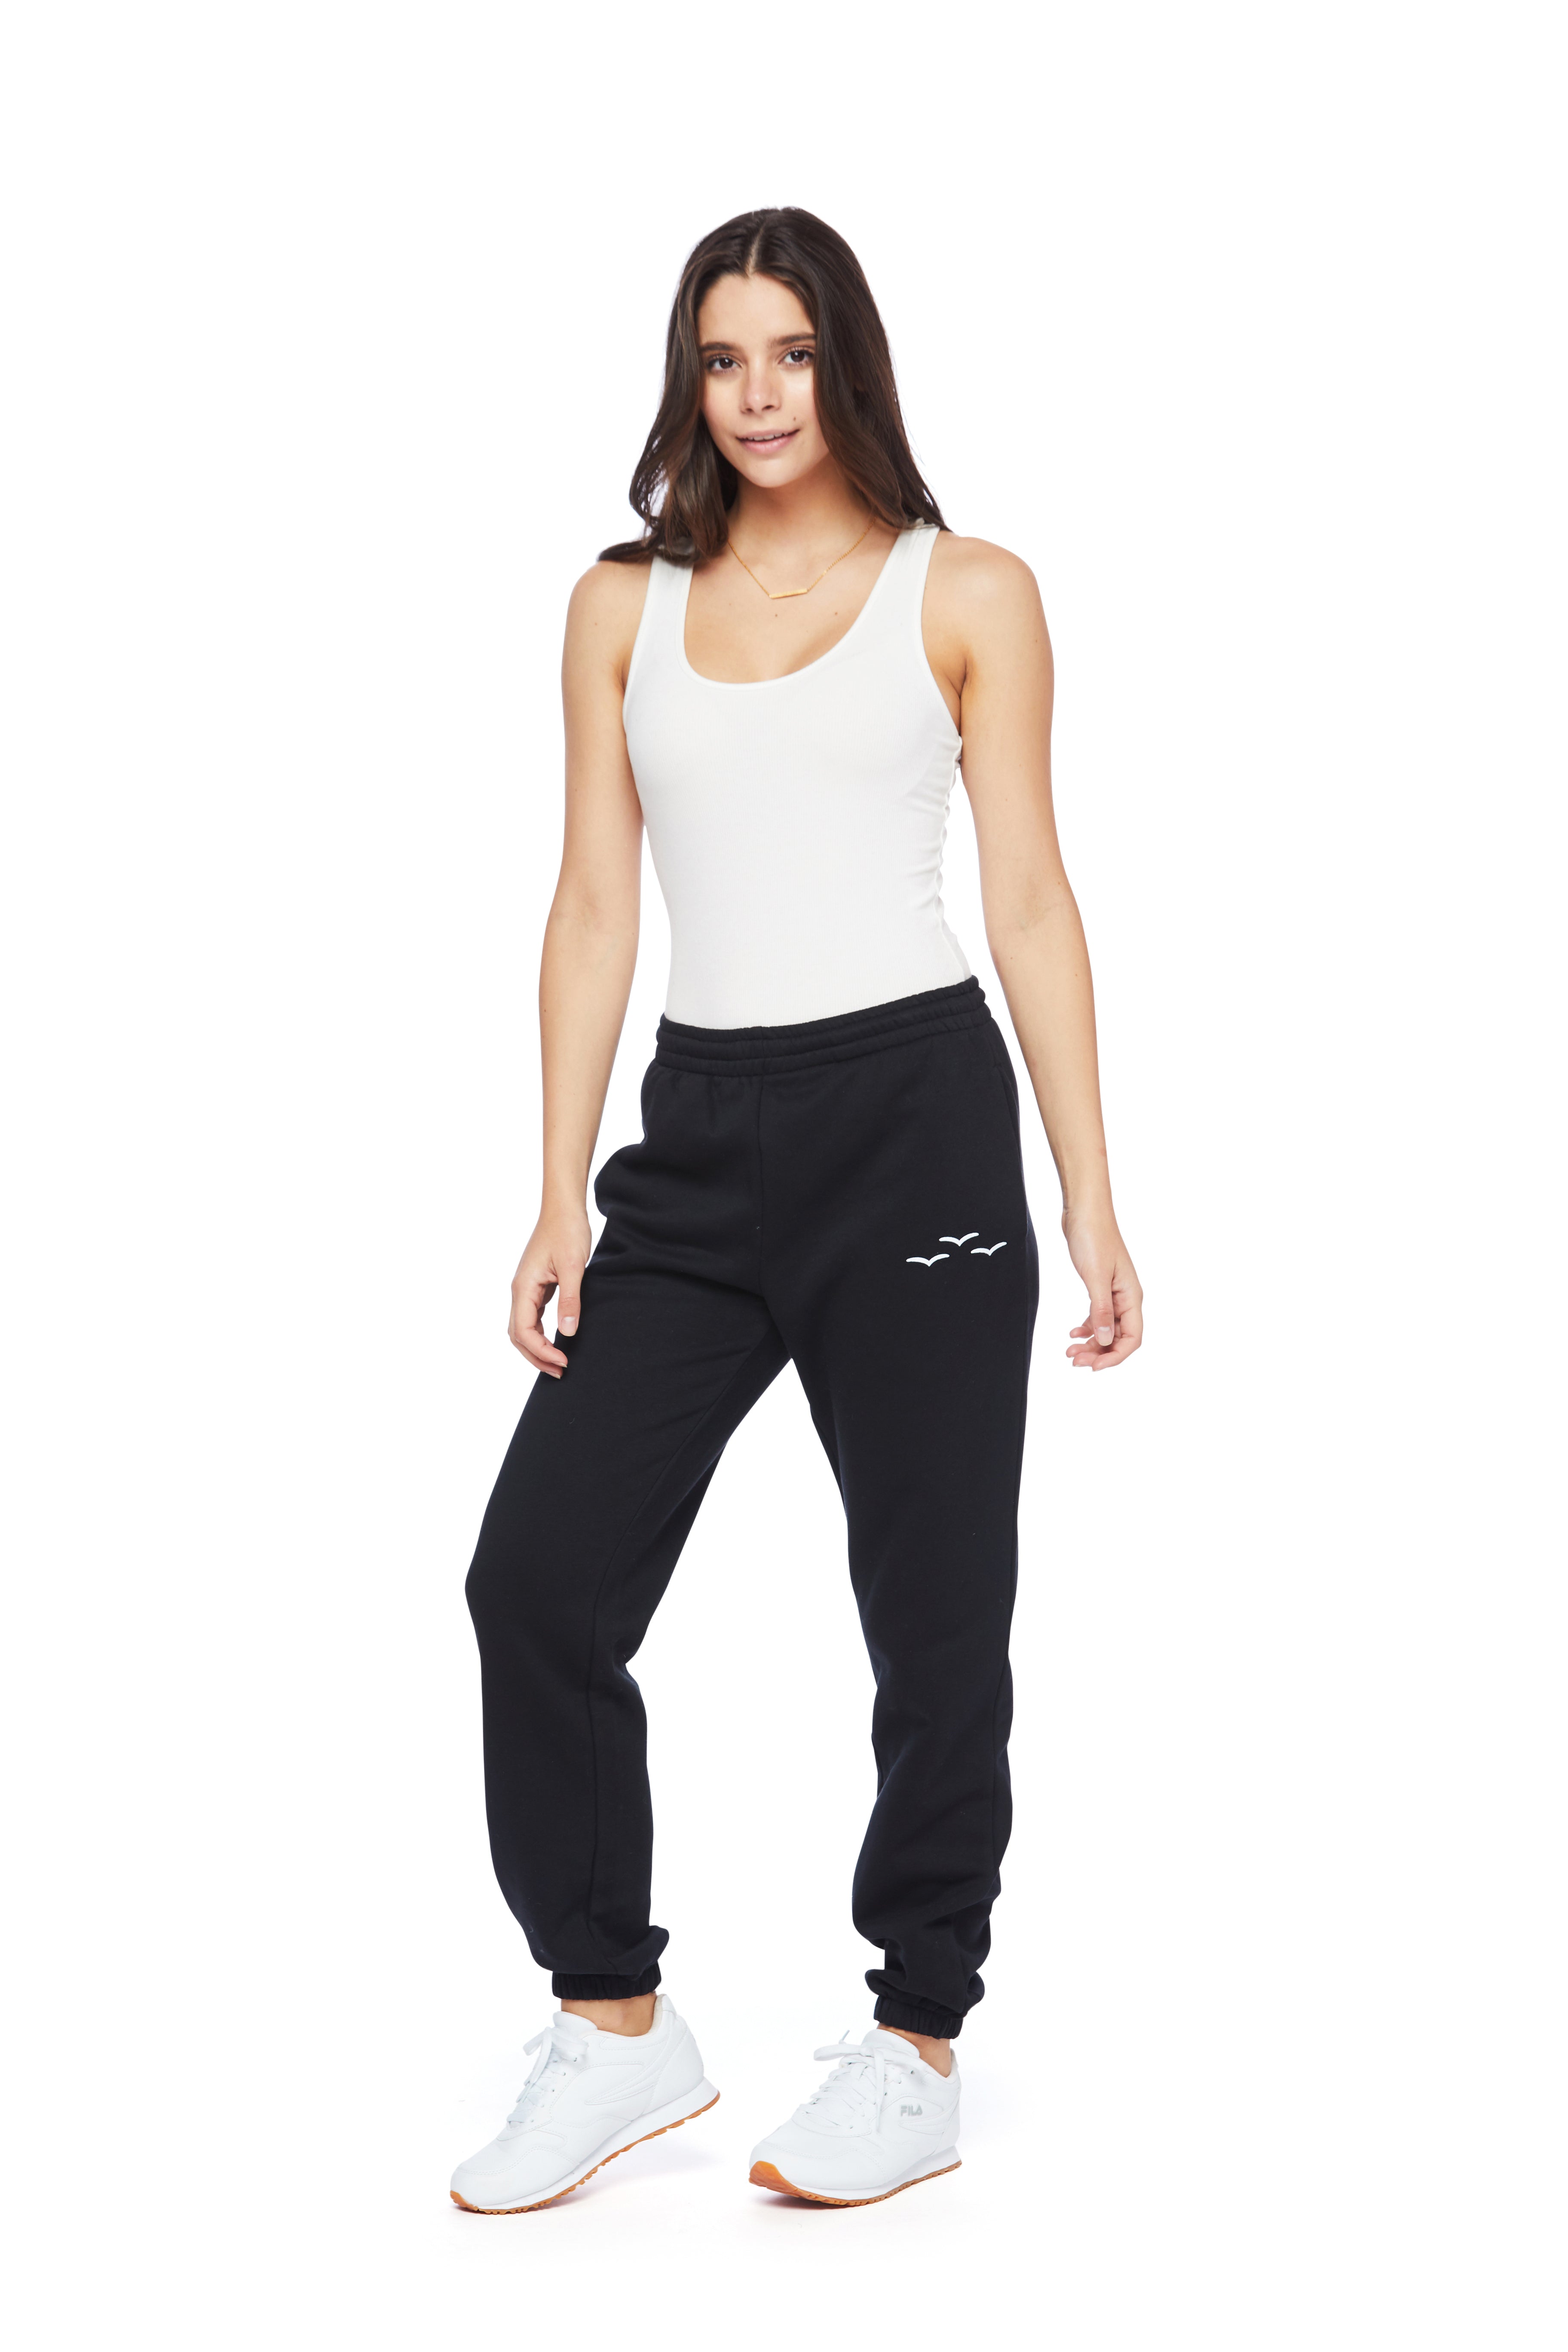 Nova Boyfriend Jogger in Black from Lazypants - always a great buy at a reasonable price.